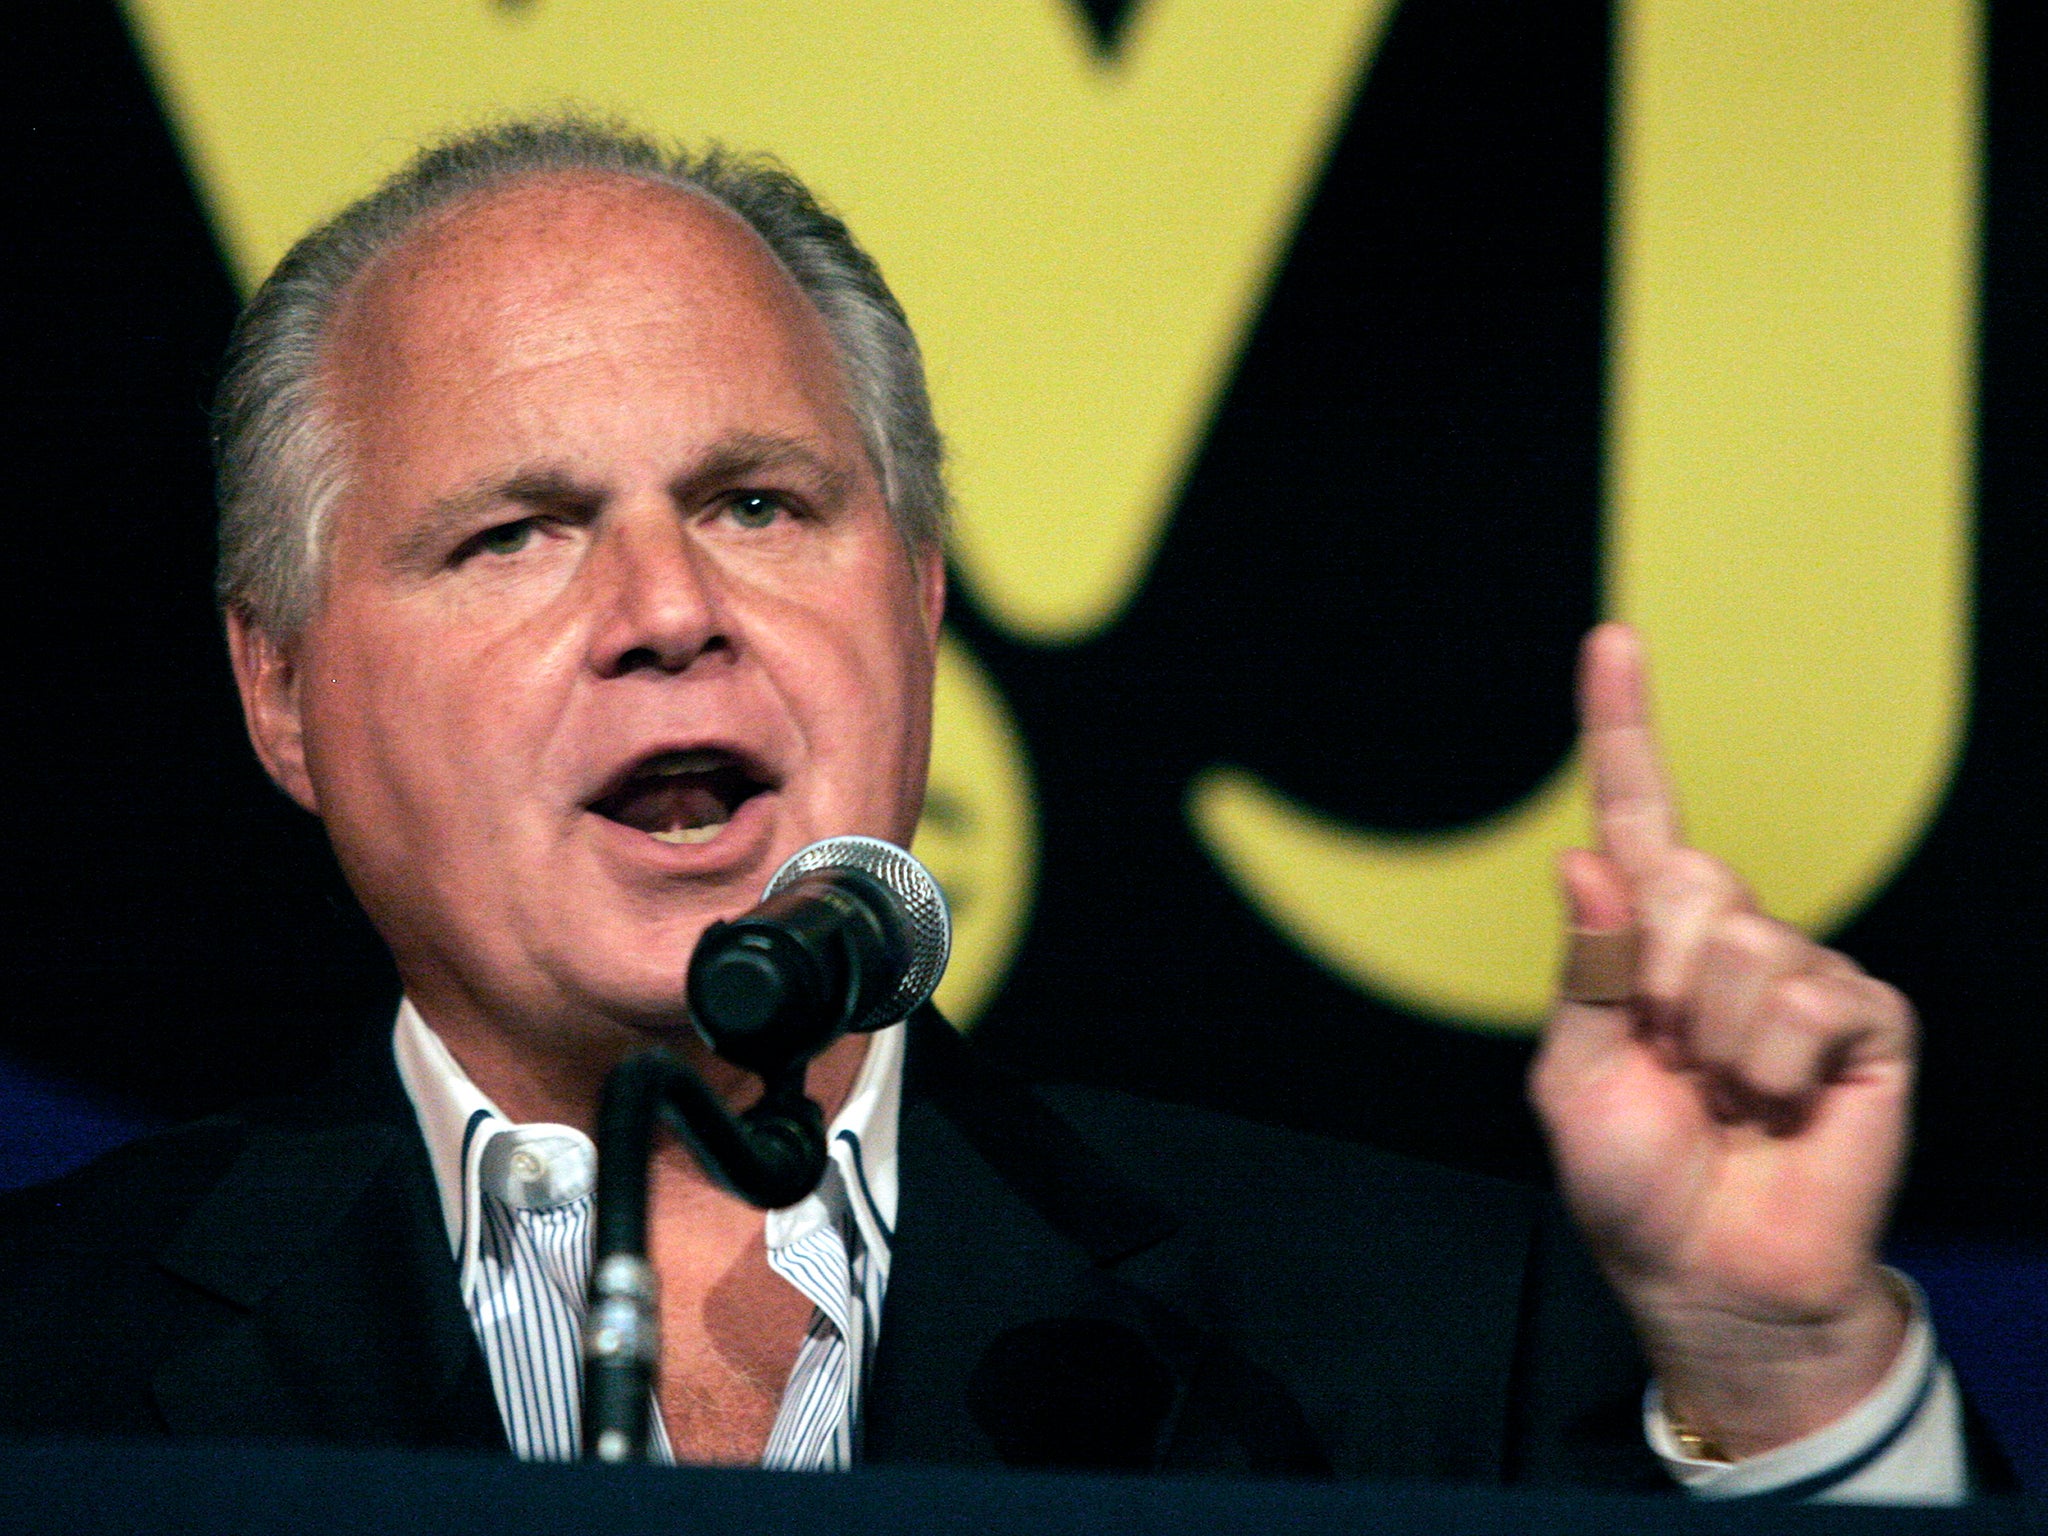 Rush Limbaugh has previously caused controversy over comments on African Americans, homosexuality and feminism.